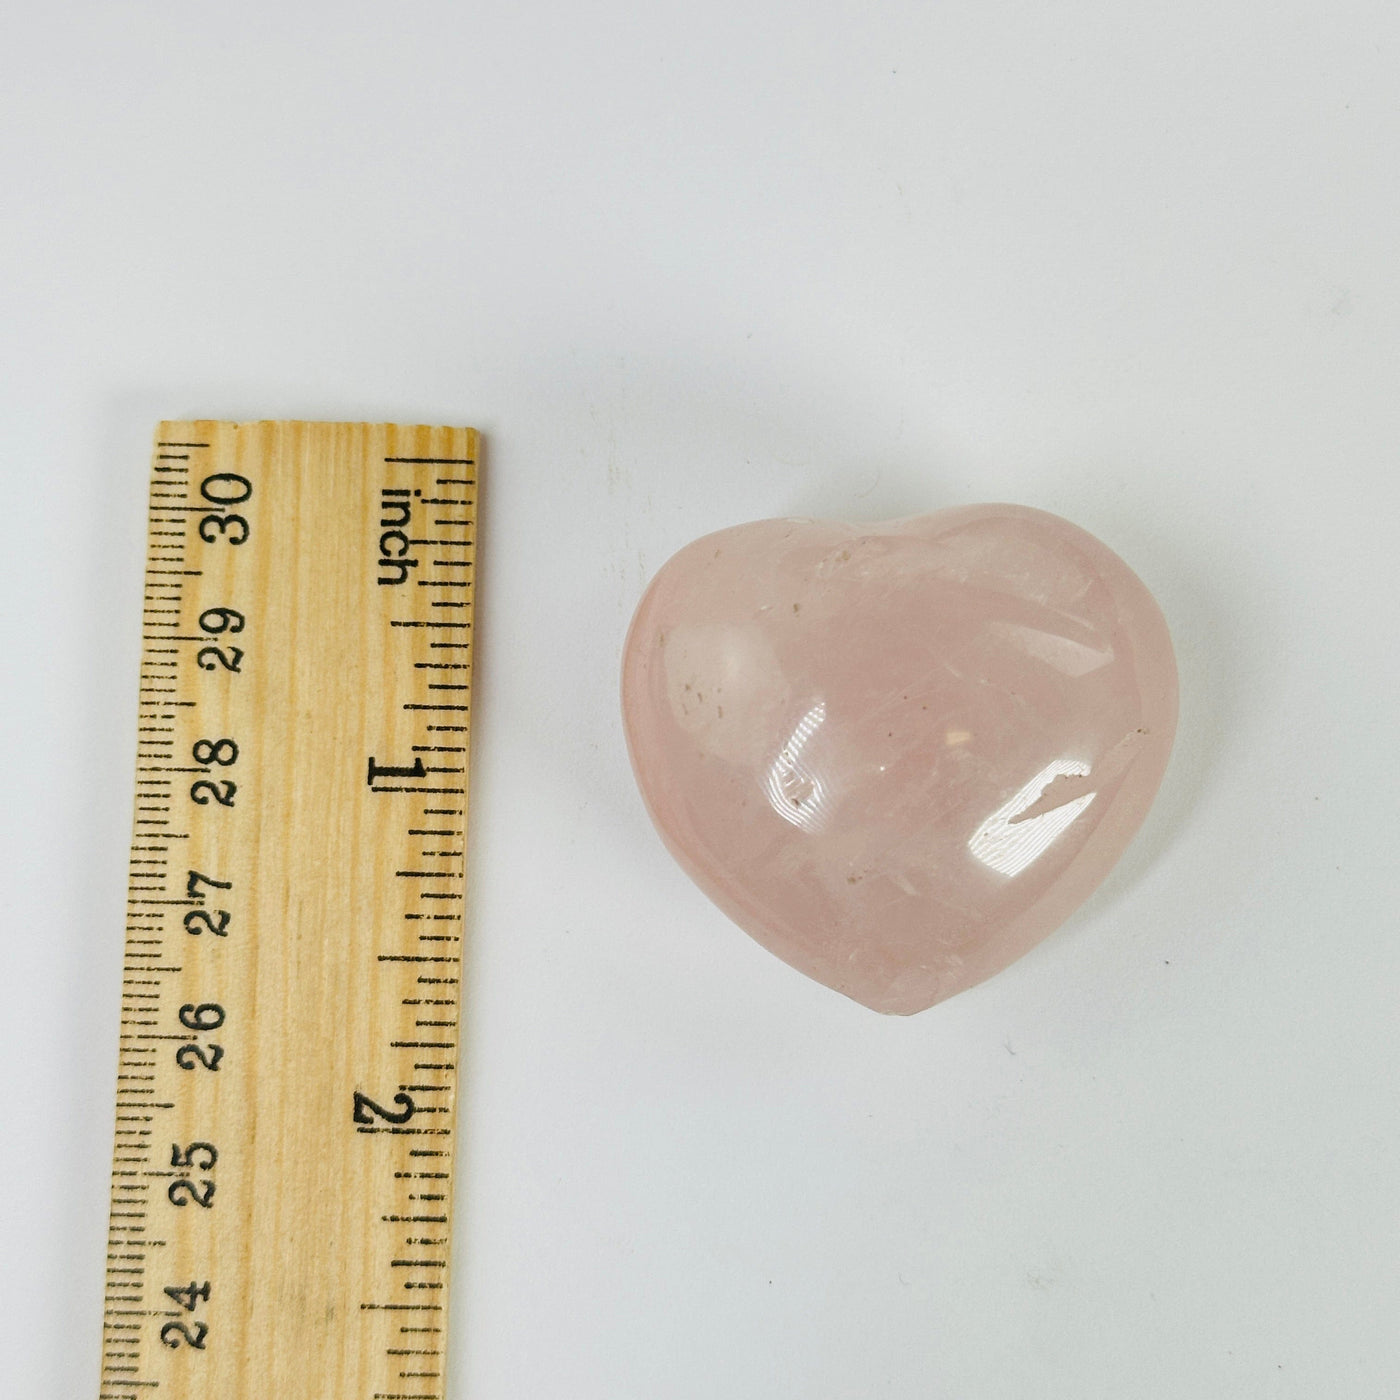 rose quartz heart next to a ruler for size reference